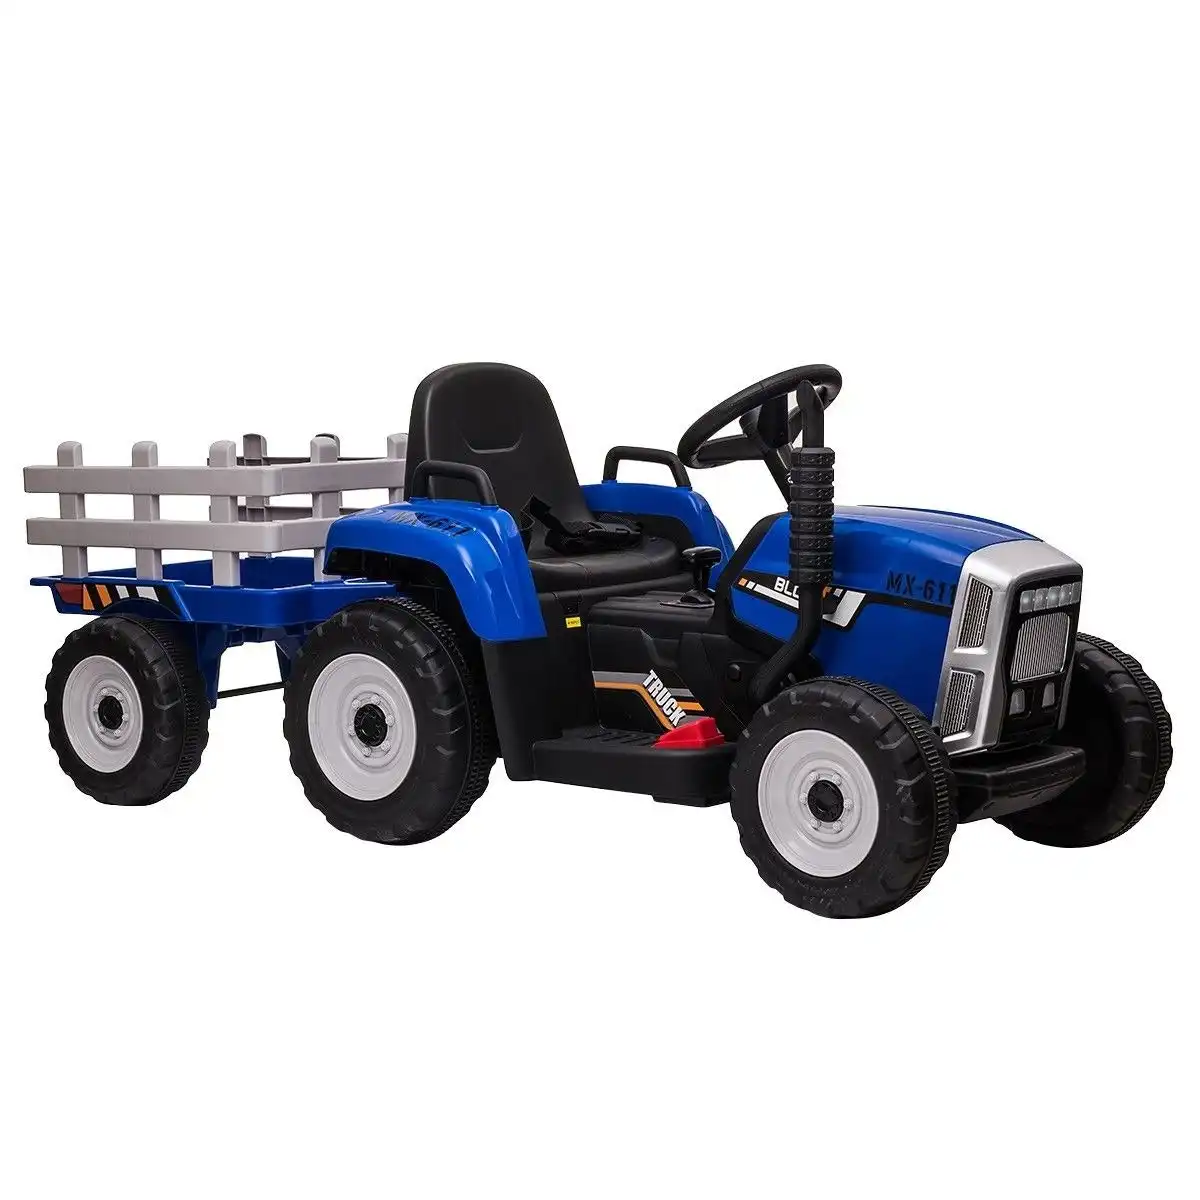 Ausway Kids Farm Tractor Electric Ride On Toys 2.4G R/C Remote Control Cars w/ Trailer Blue